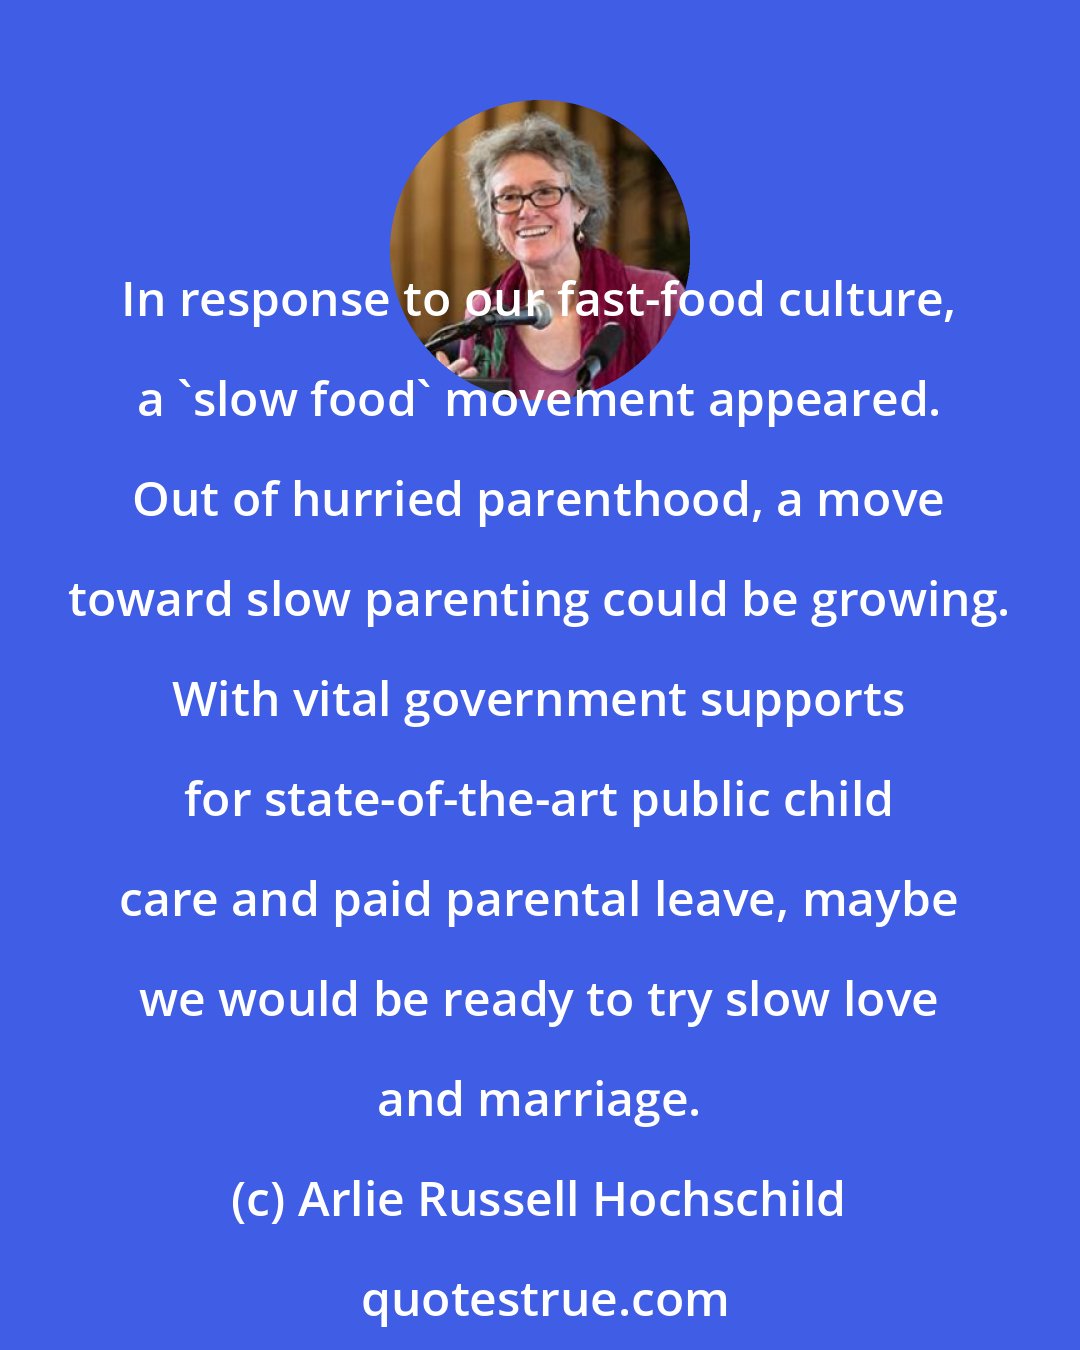 Arlie Russell Hochschild: In response to our fast-food culture, a 'slow food' movement appeared. Out of hurried parenthood, a move toward slow parenting could be growing. With vital government supports for state-of-the-art public child care and paid parental leave, maybe we would be ready to try slow love and marriage.